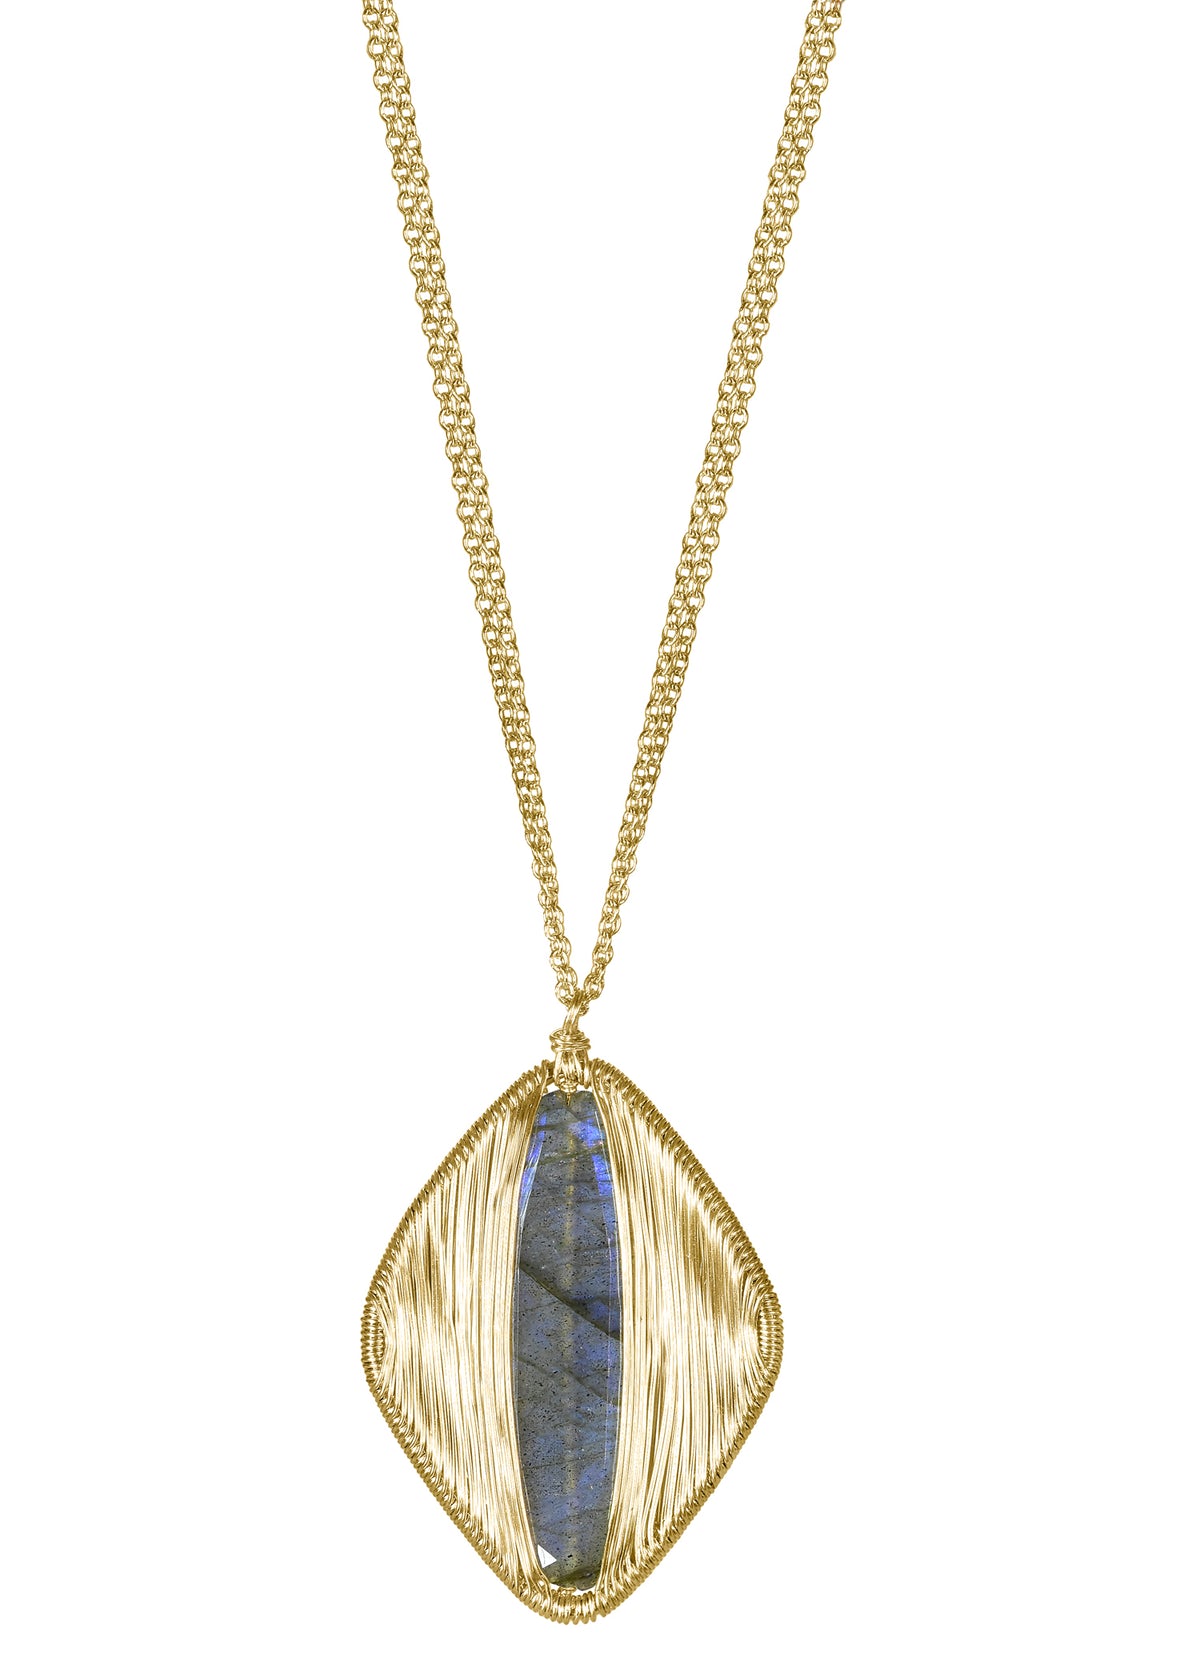 Labradorite 14k gold fill Double chain necklace measures 17&quot; Pendant measures 1-1/4&quot; in length and 7/8&quot; in width Handmade in our Los Angeles studio